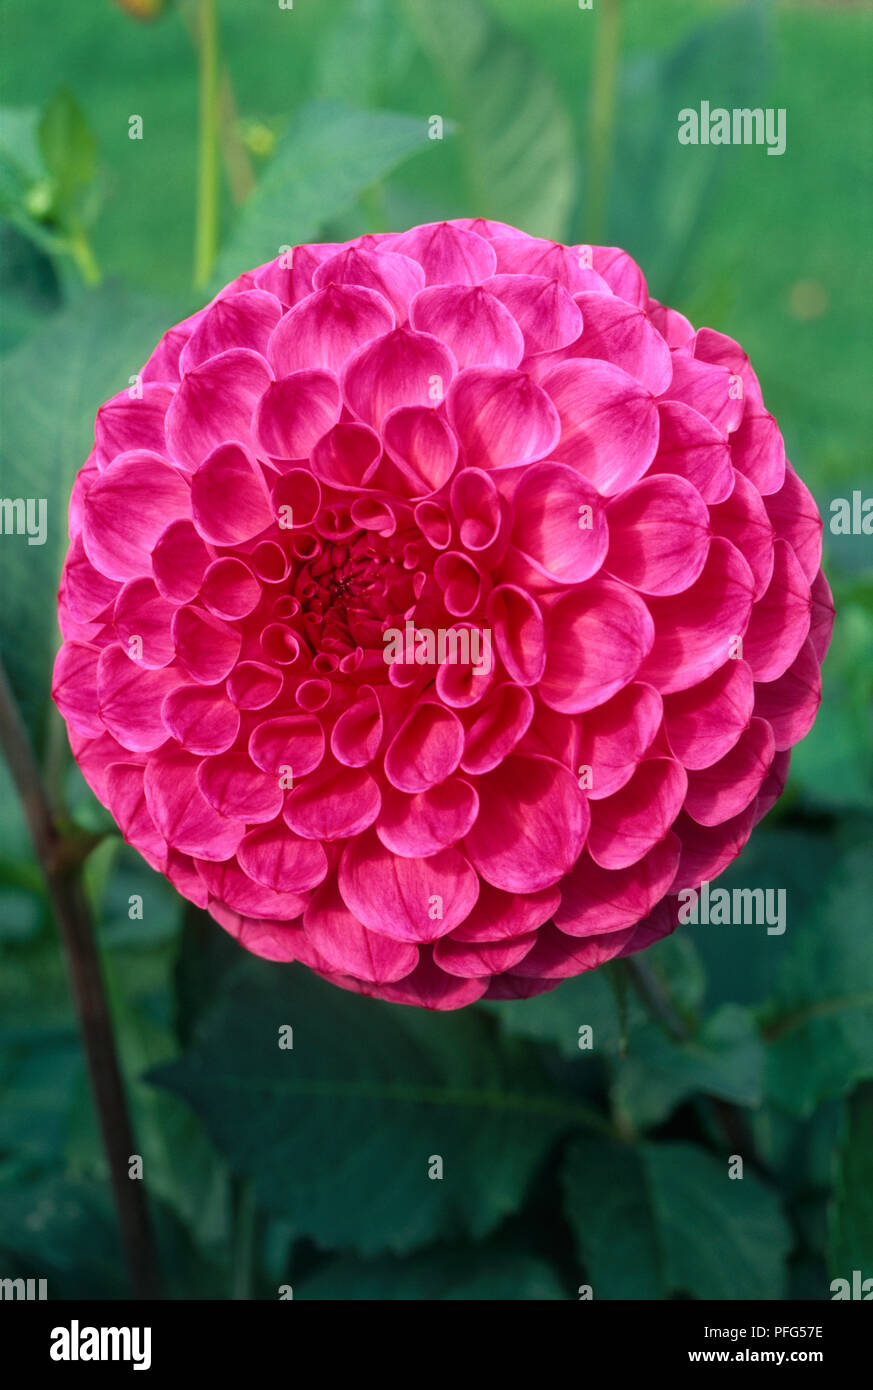 Bright pink flower head from Dahlia 'Barberry Carousel', close-up Stock Photo